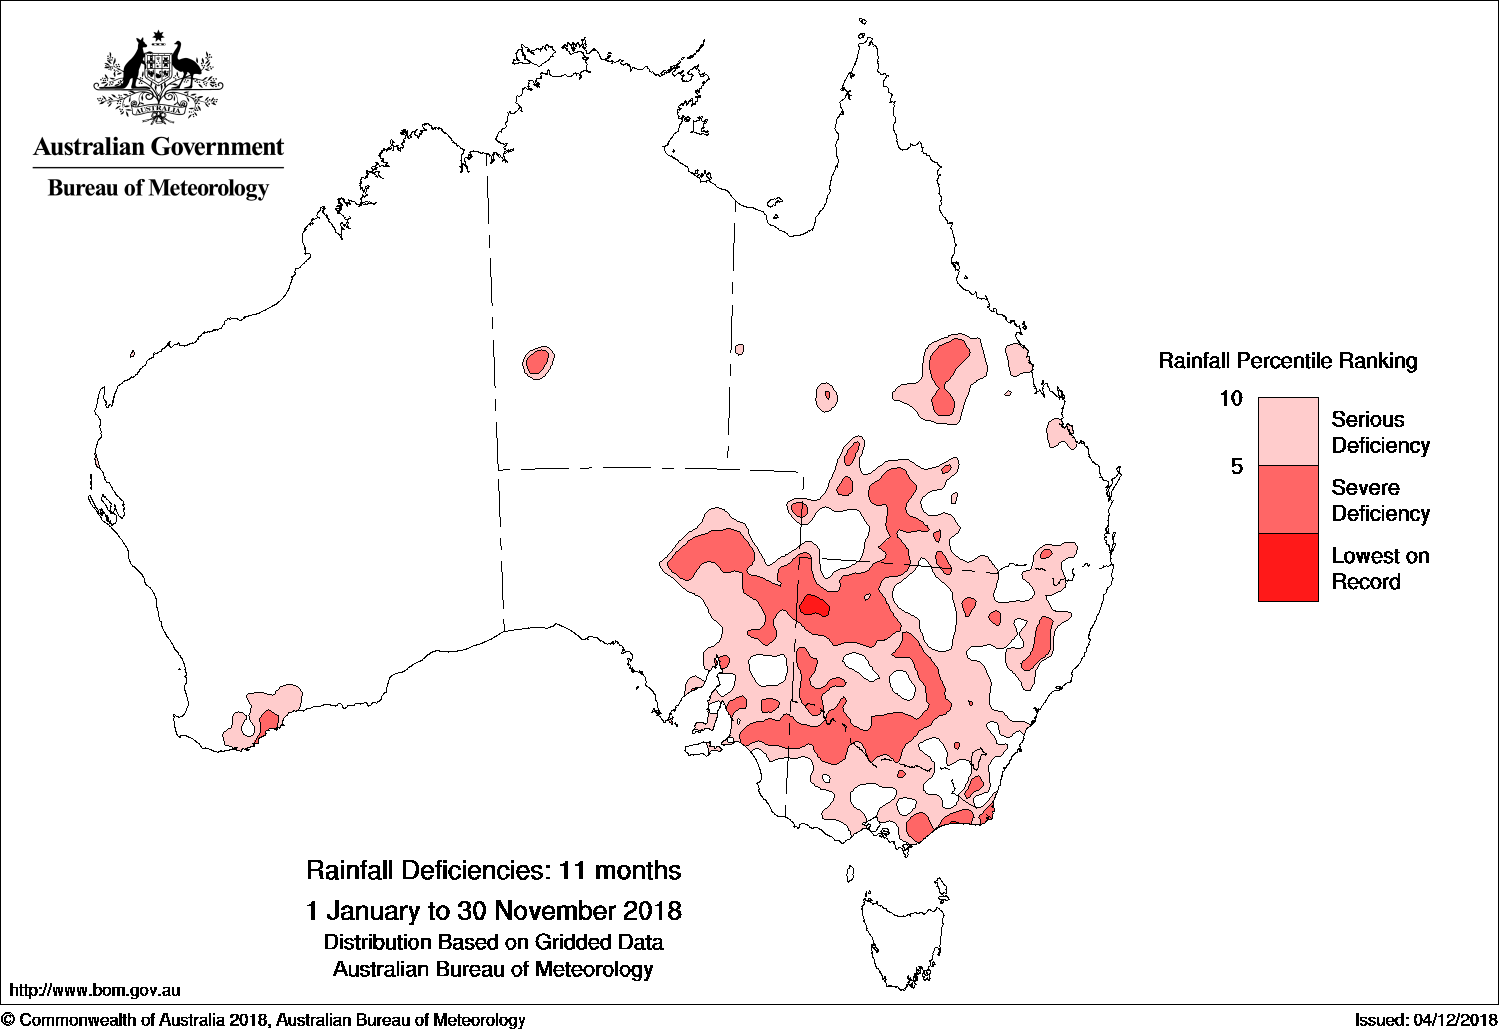 This maps shows the rainfall deficiencies across Australia in 2018 (up until Nov 30) with regions shaded based on level of rainfall deficiency.